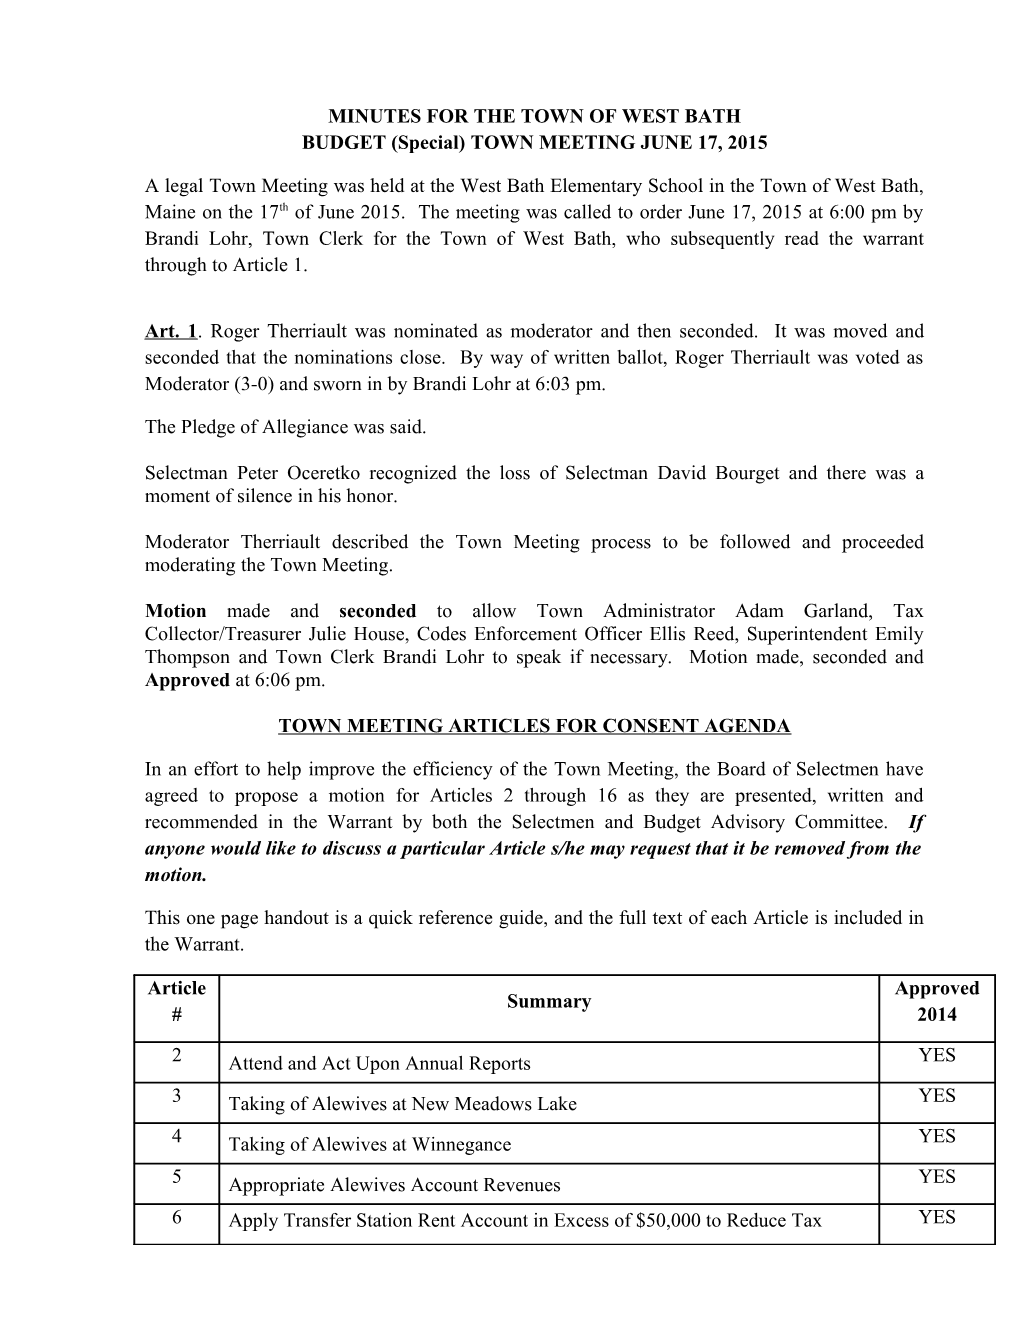 MINUTES for the TOWN of WEST BATH BUDGET (Special) TOWN MEETING JUNE 17, 2015